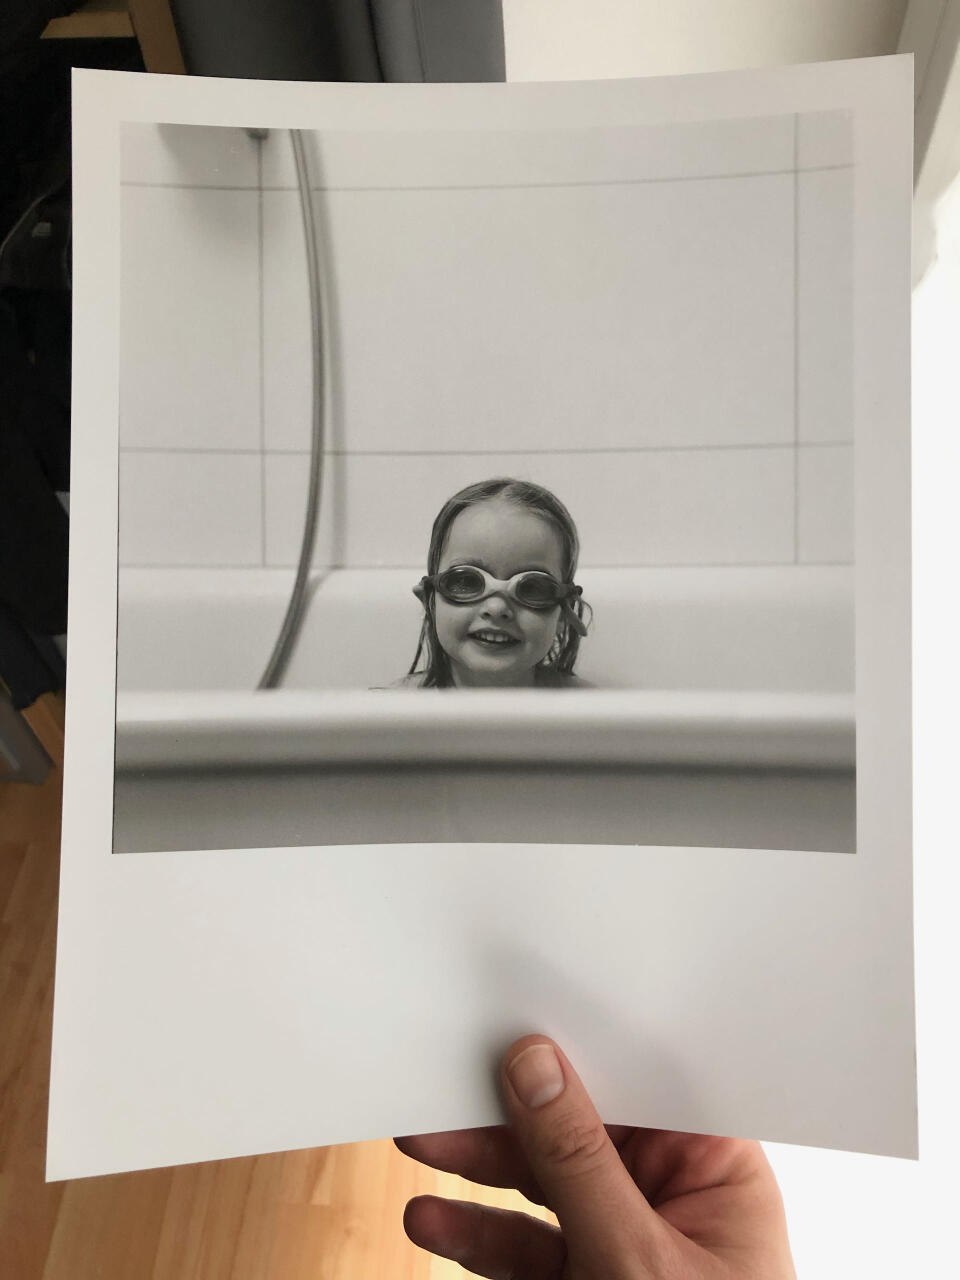 Zoe (3) in the bathtub, with swimming goggles on.